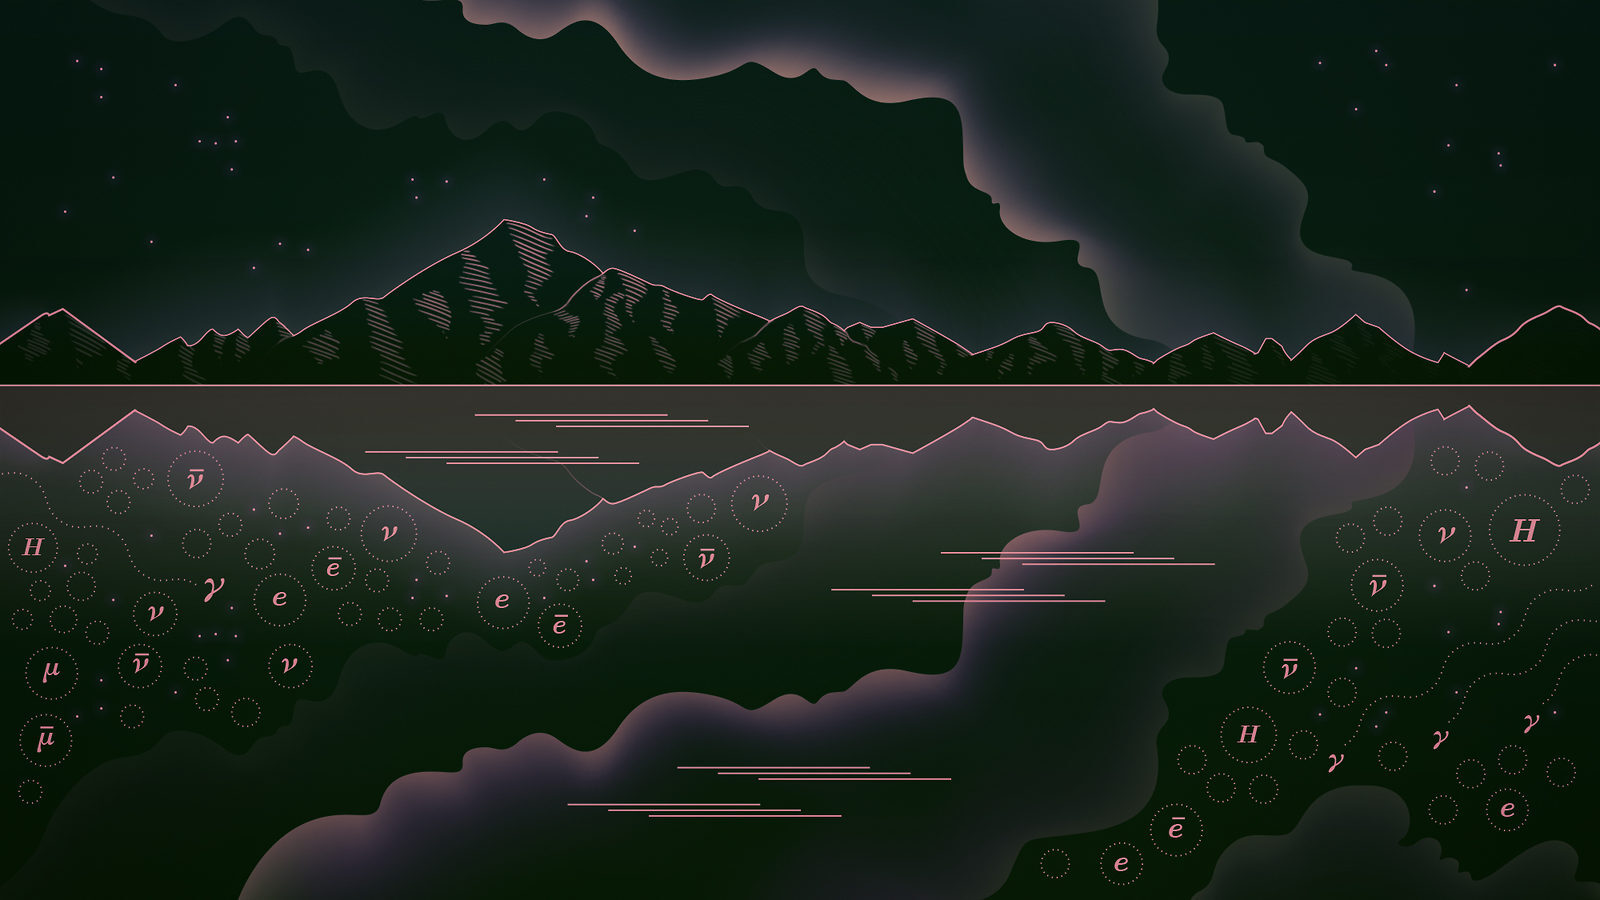 Illustration of black and pink mountains with smoke over lake with mirror reflection